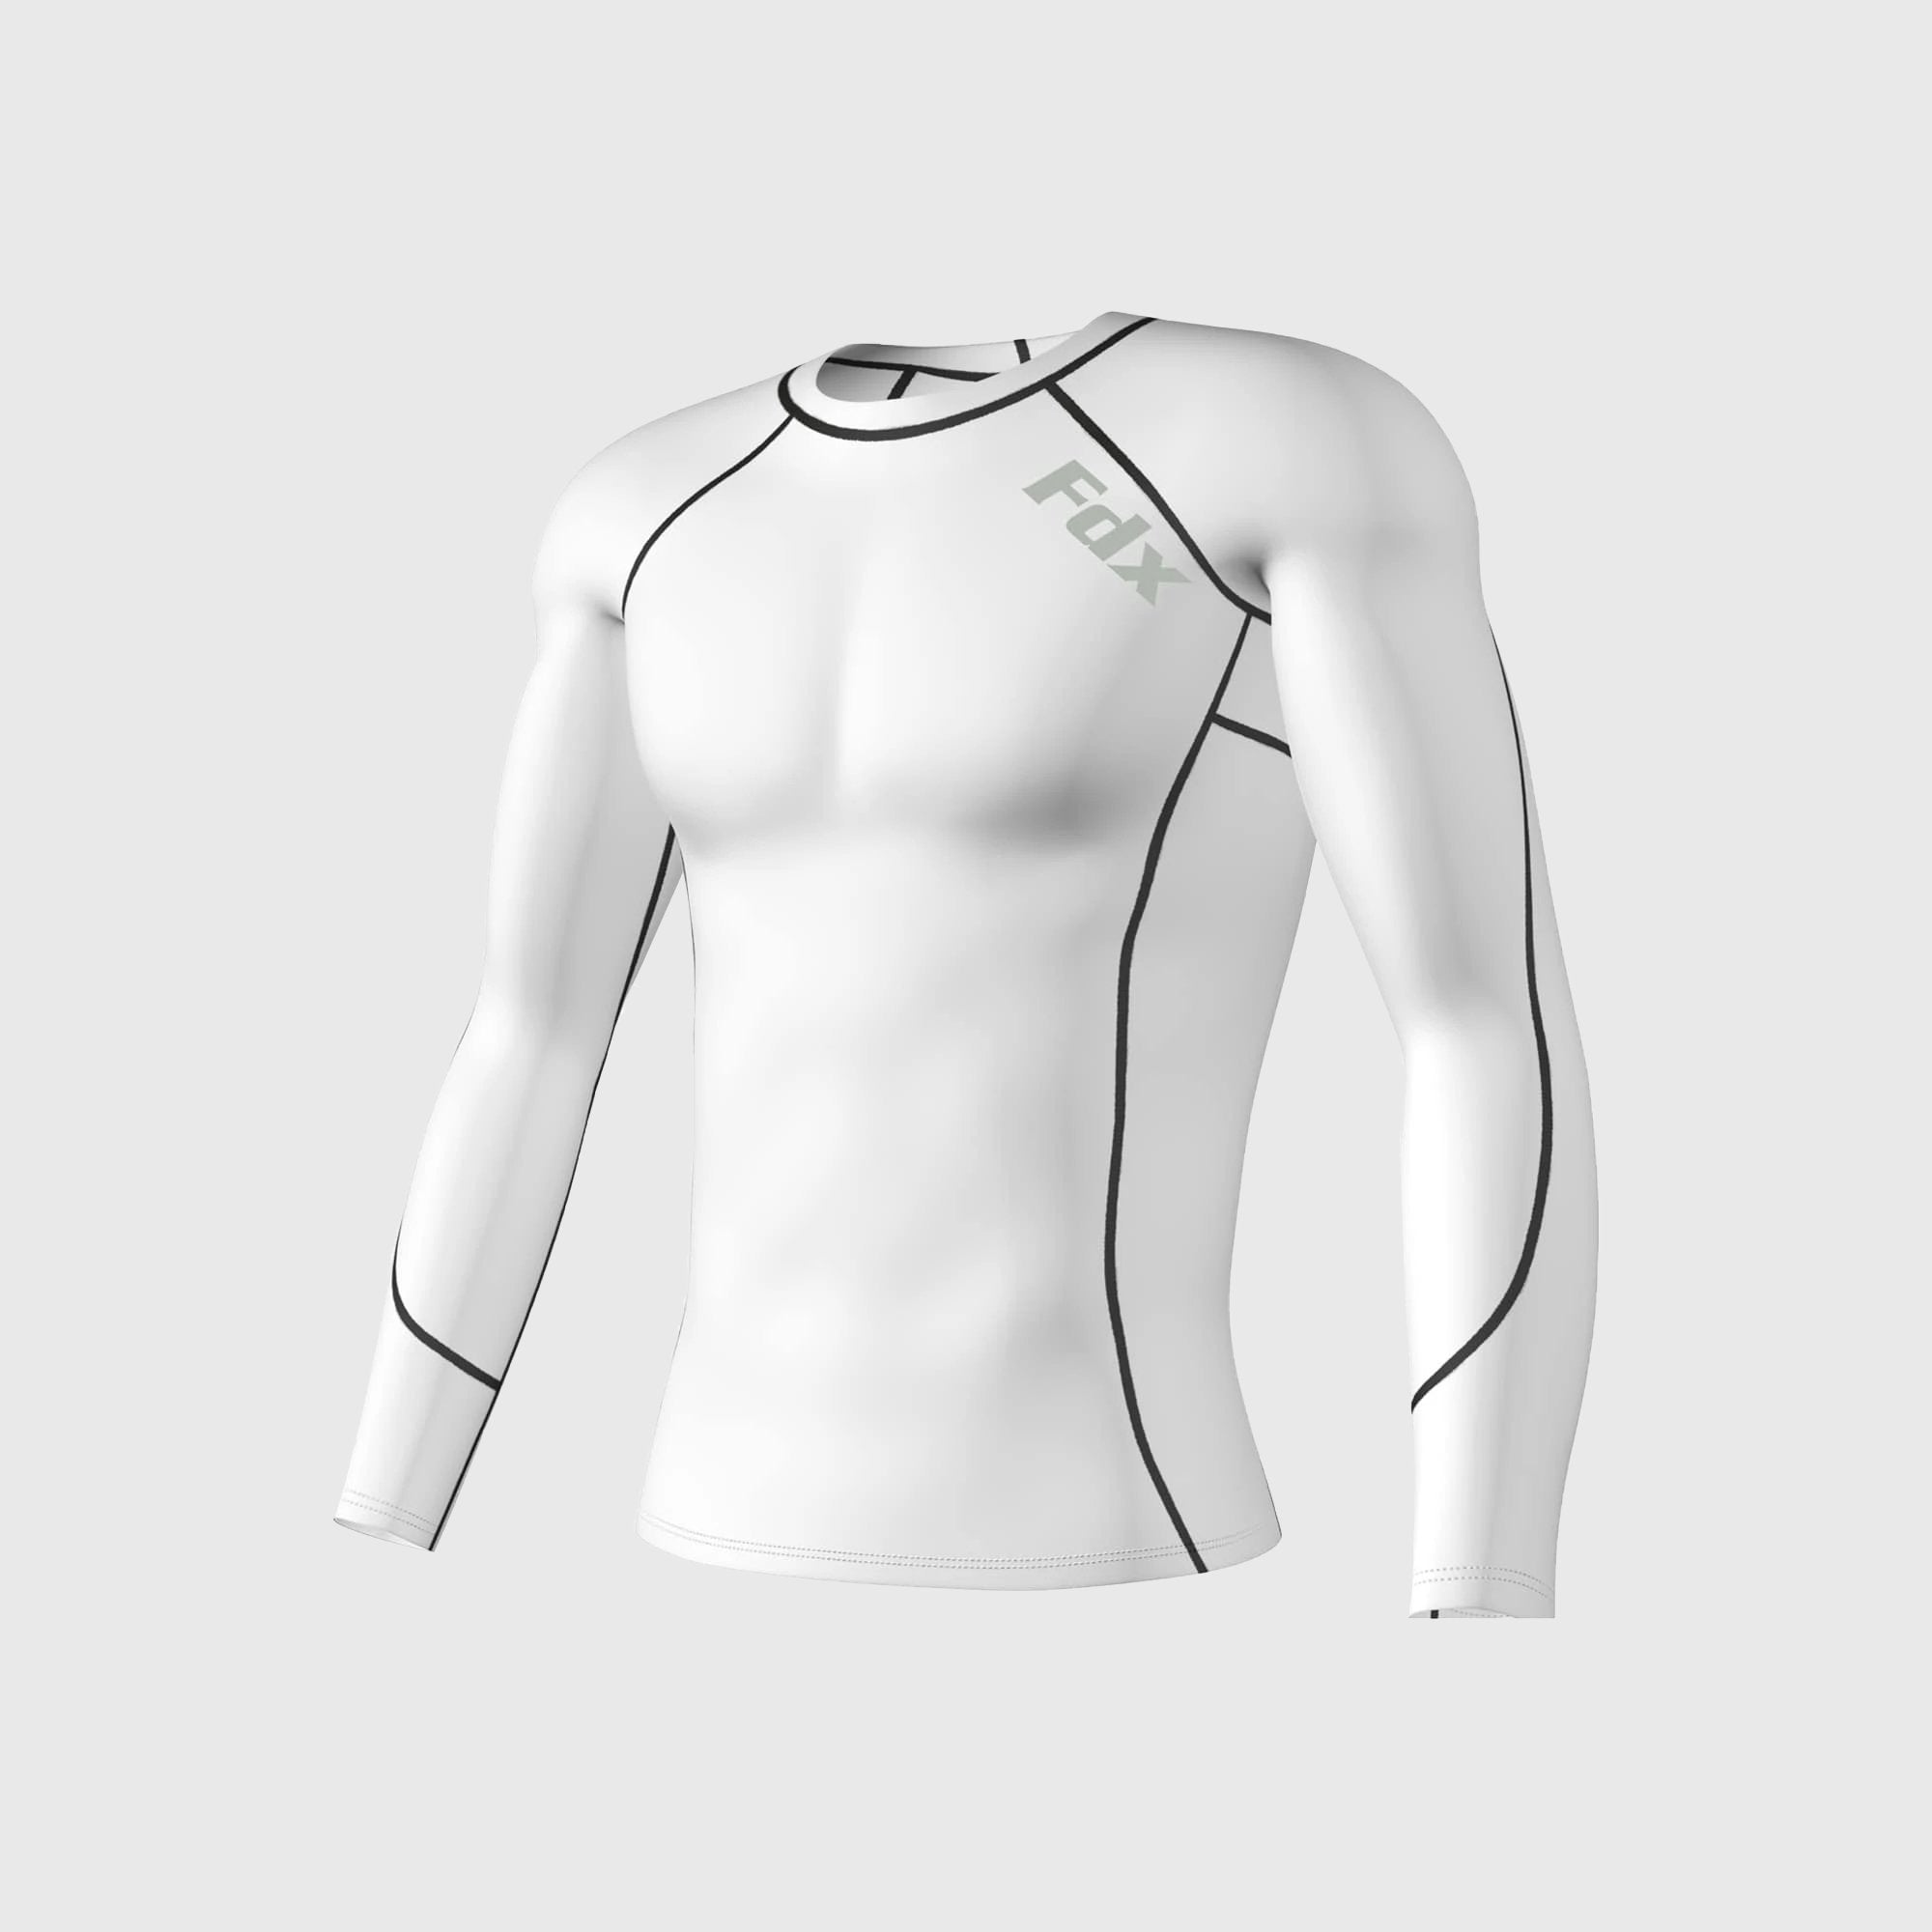 Trendy and Organic white long sleeve compression shirt for All